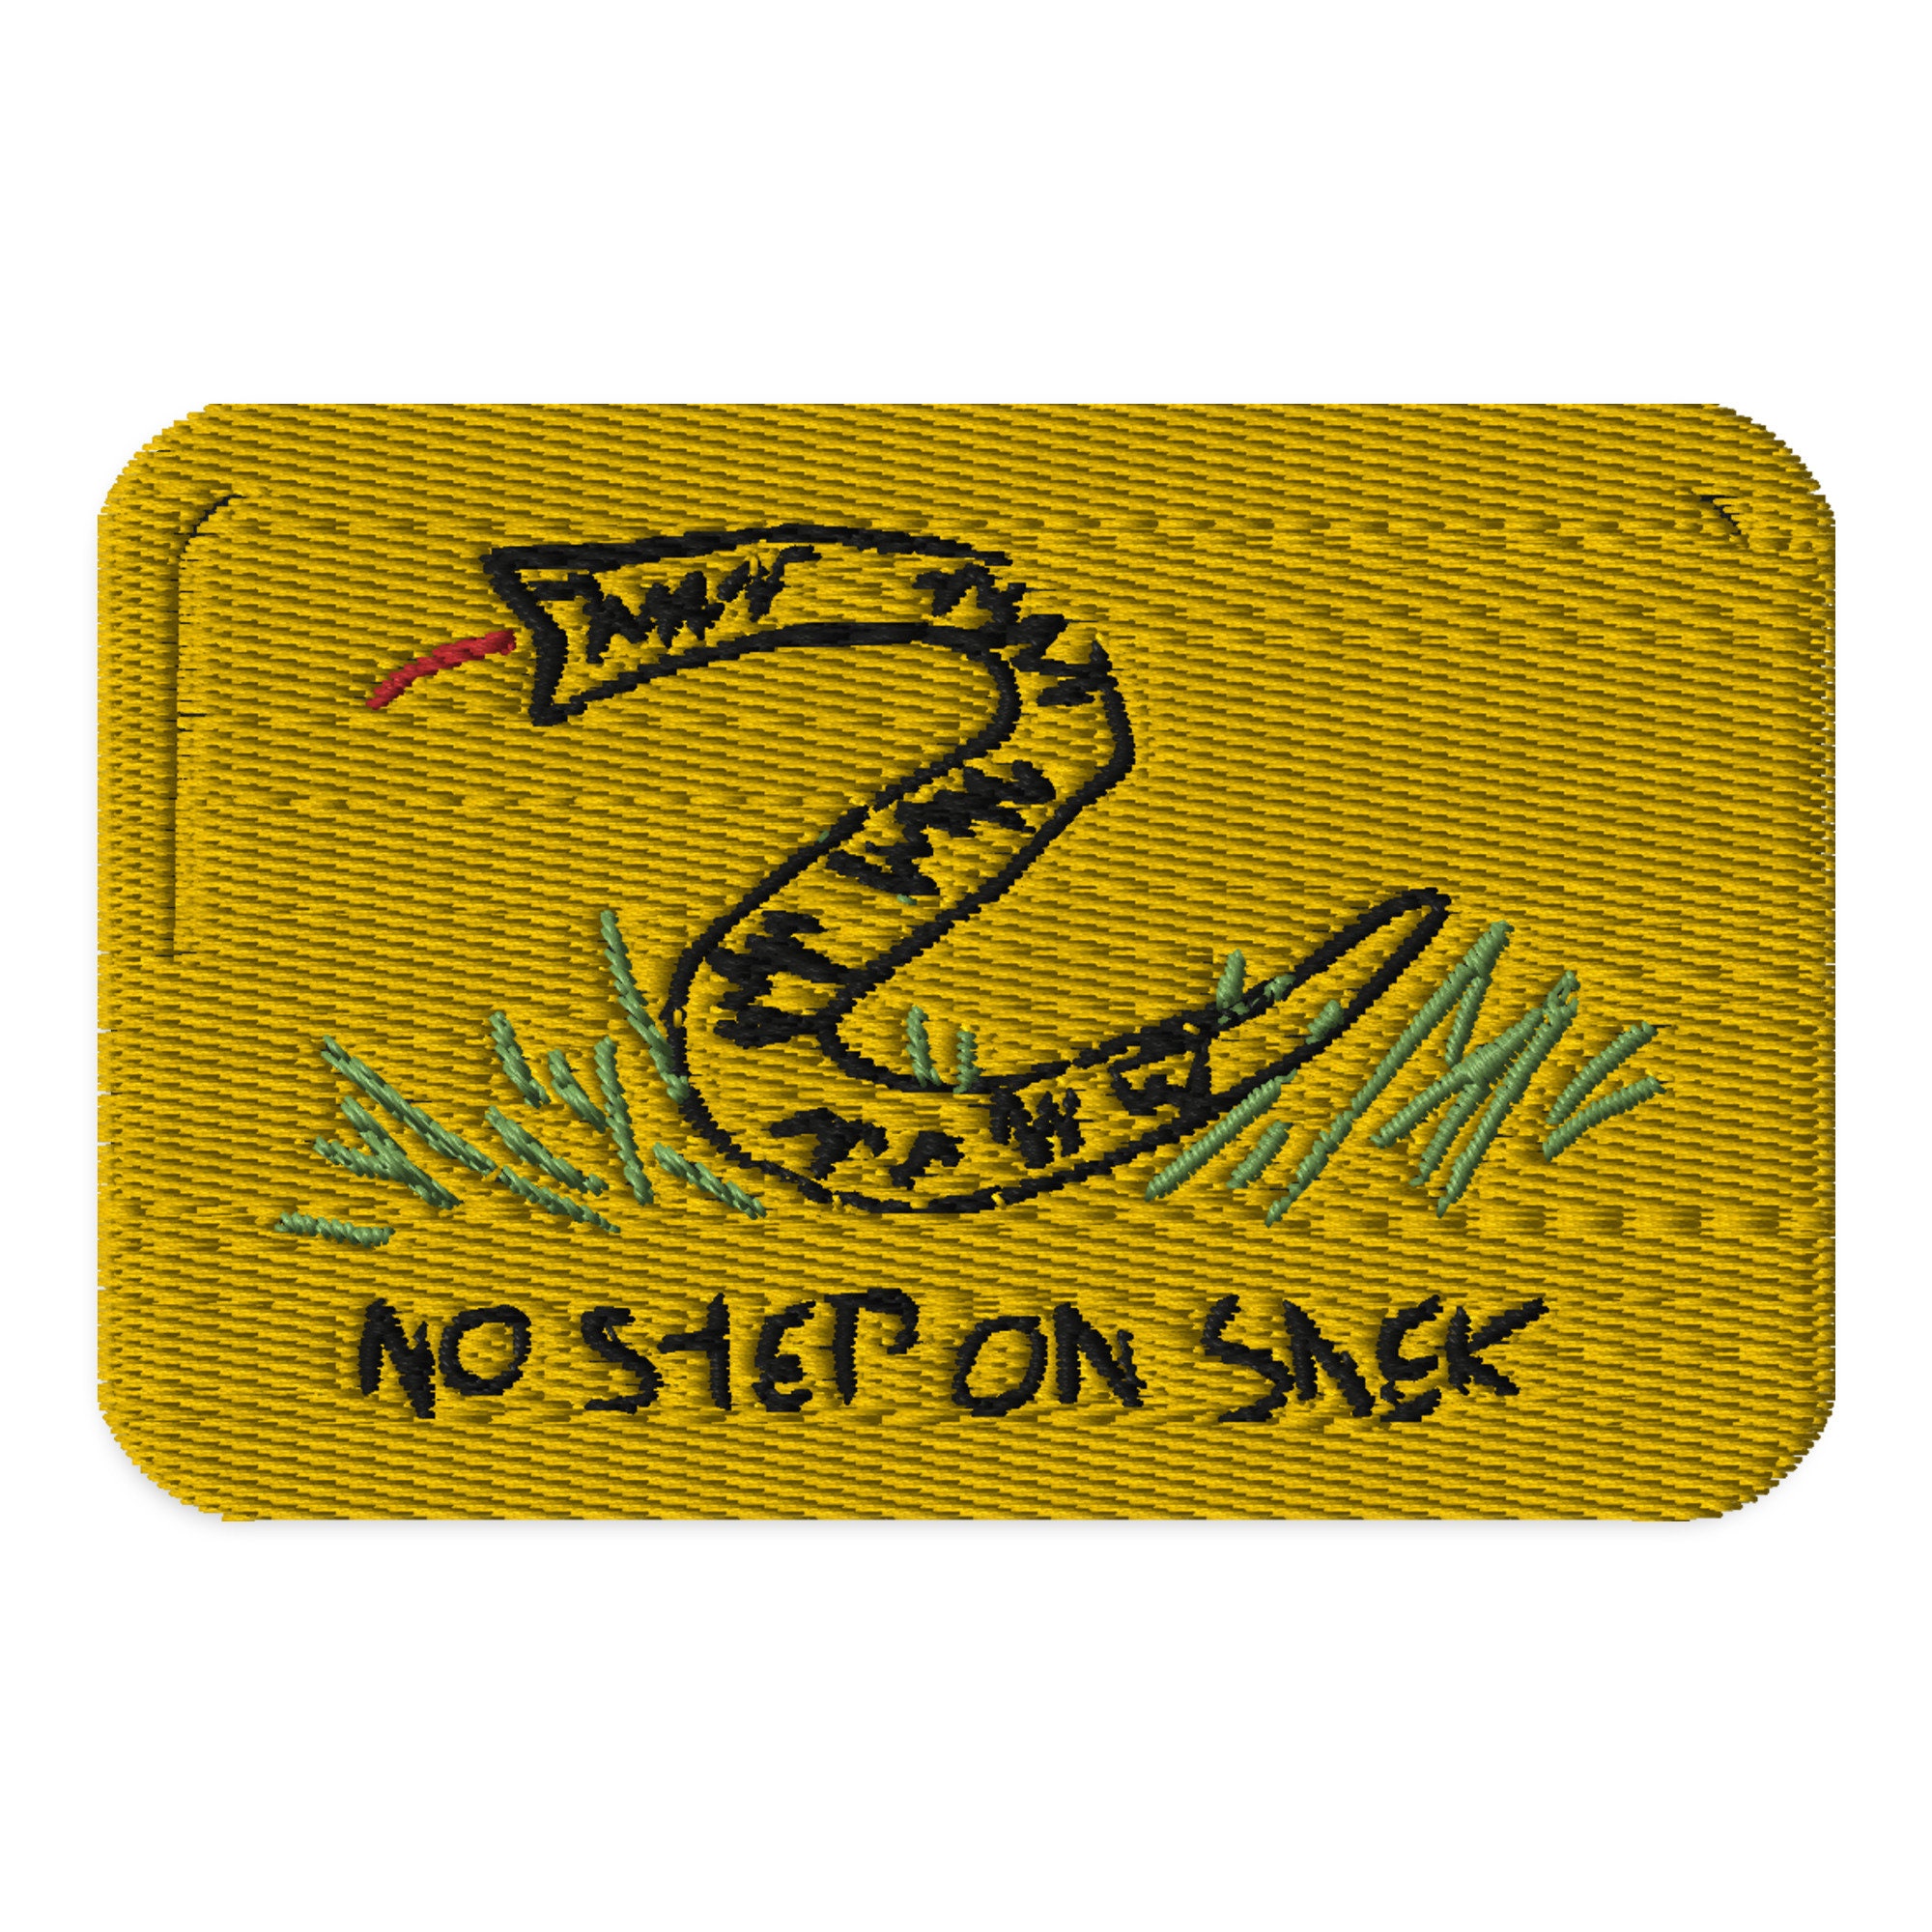 No Disassemble Funny Morale Patch Tactical Military Army Badge USA